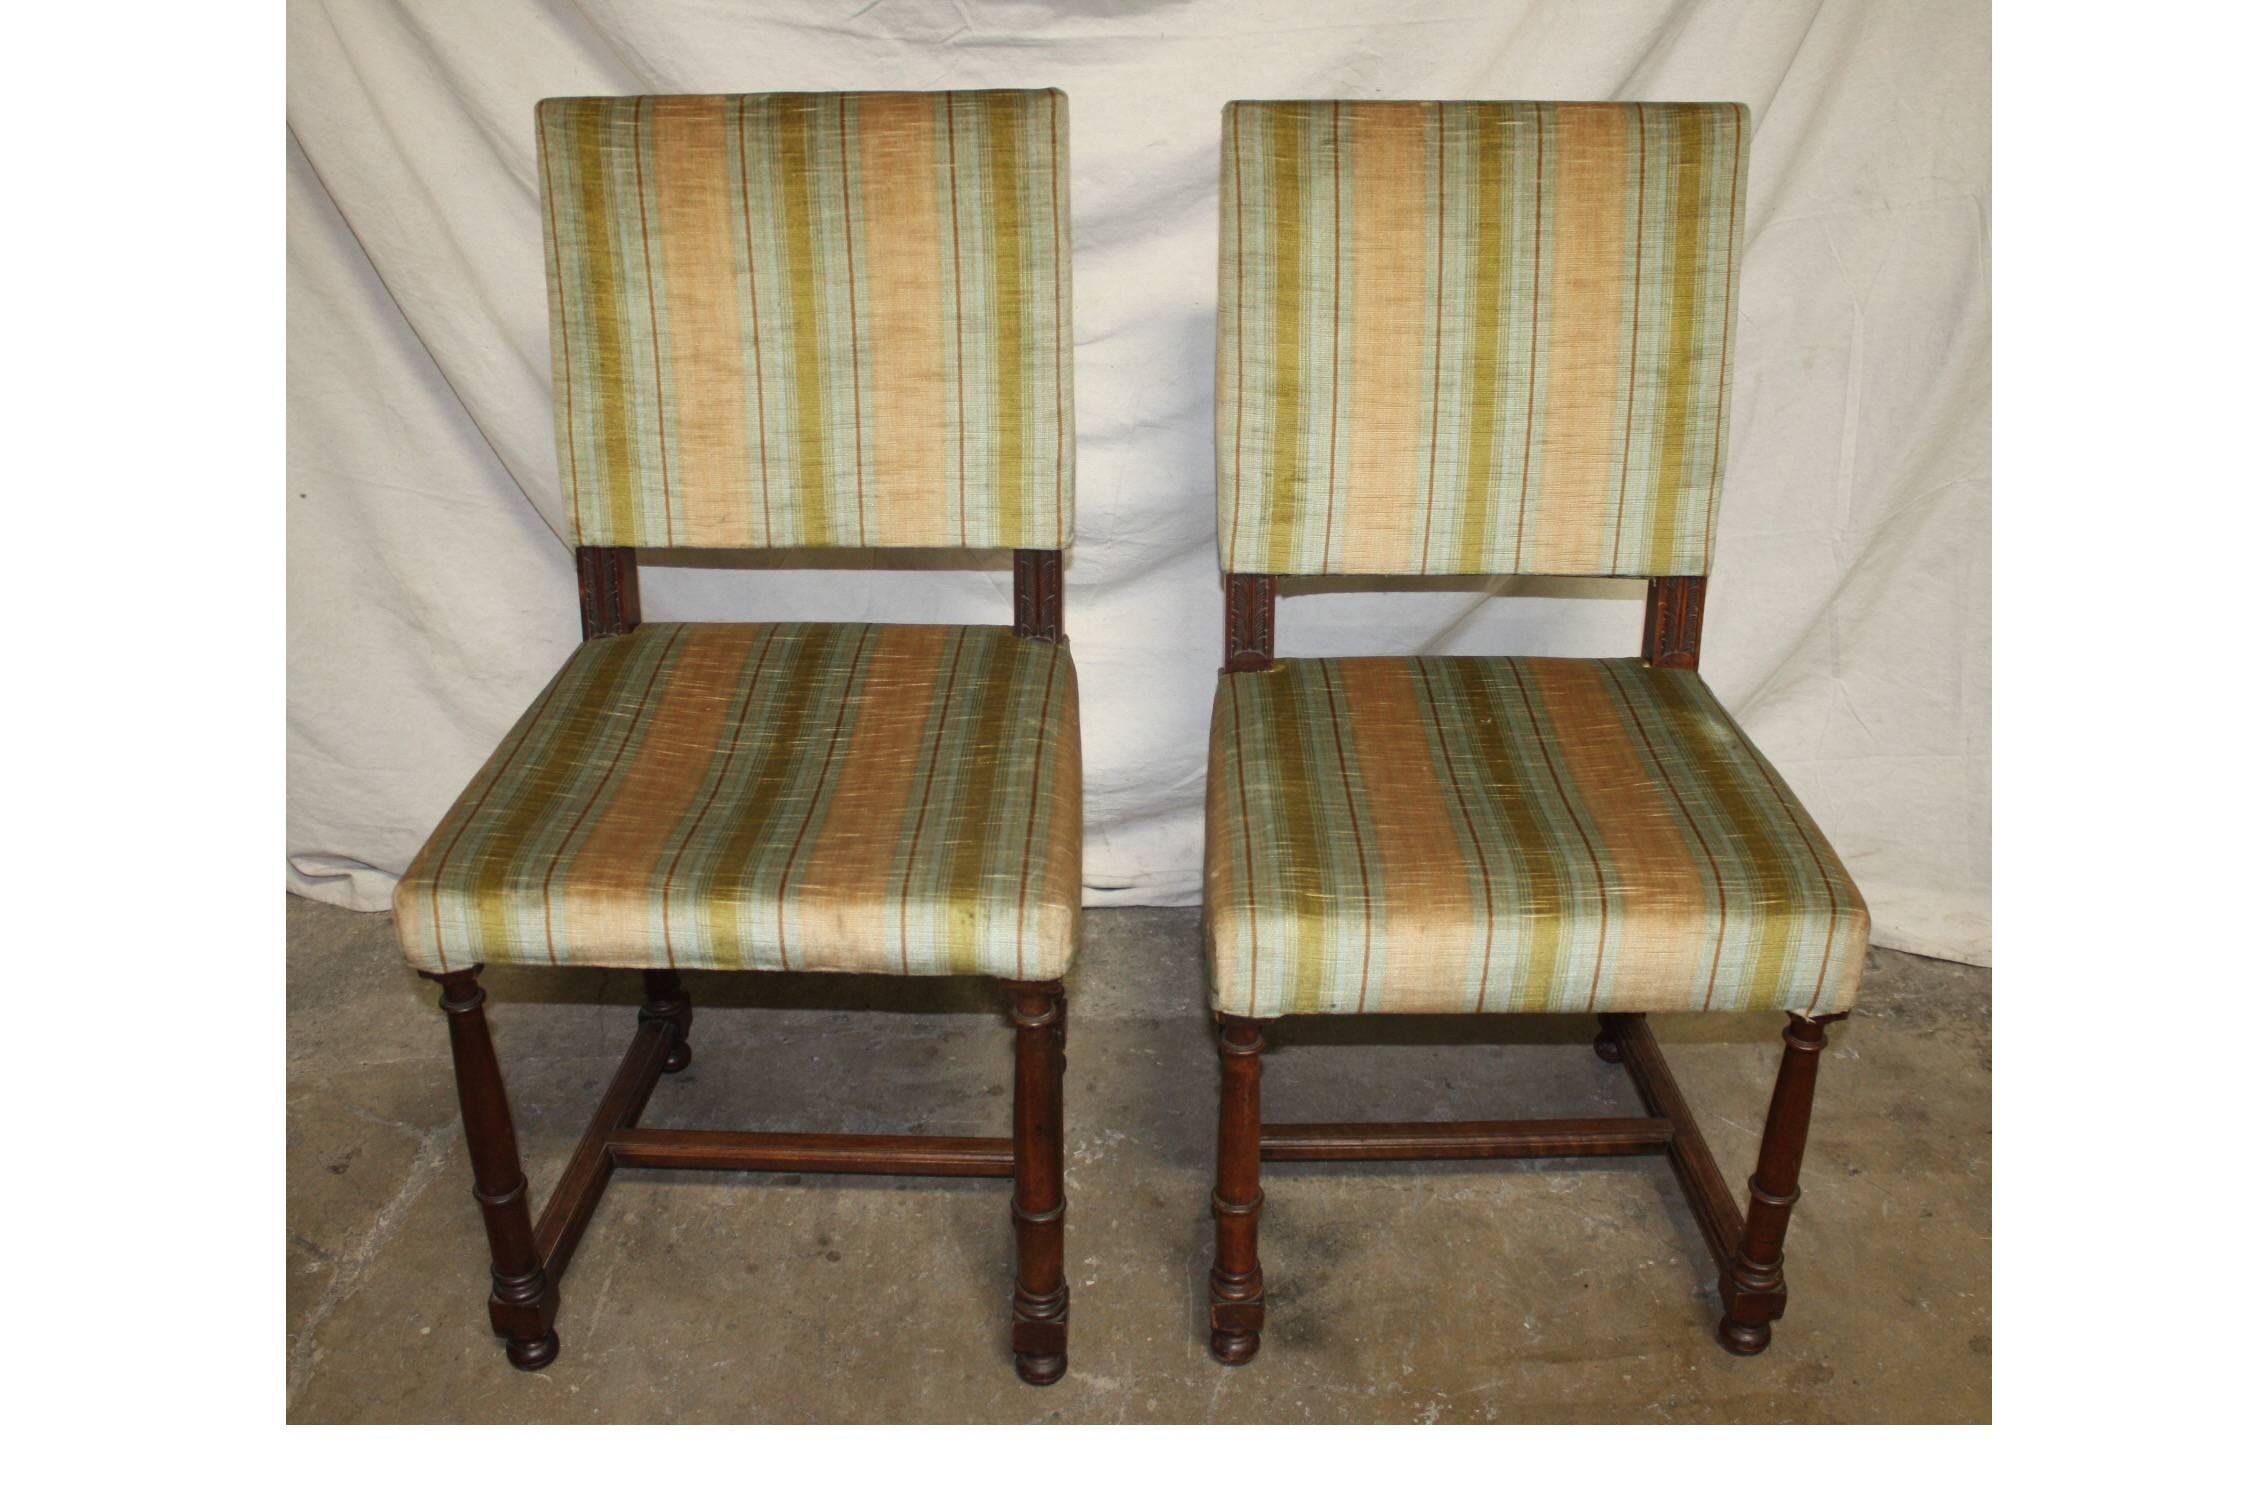 Pair of 19th century French side chairs.